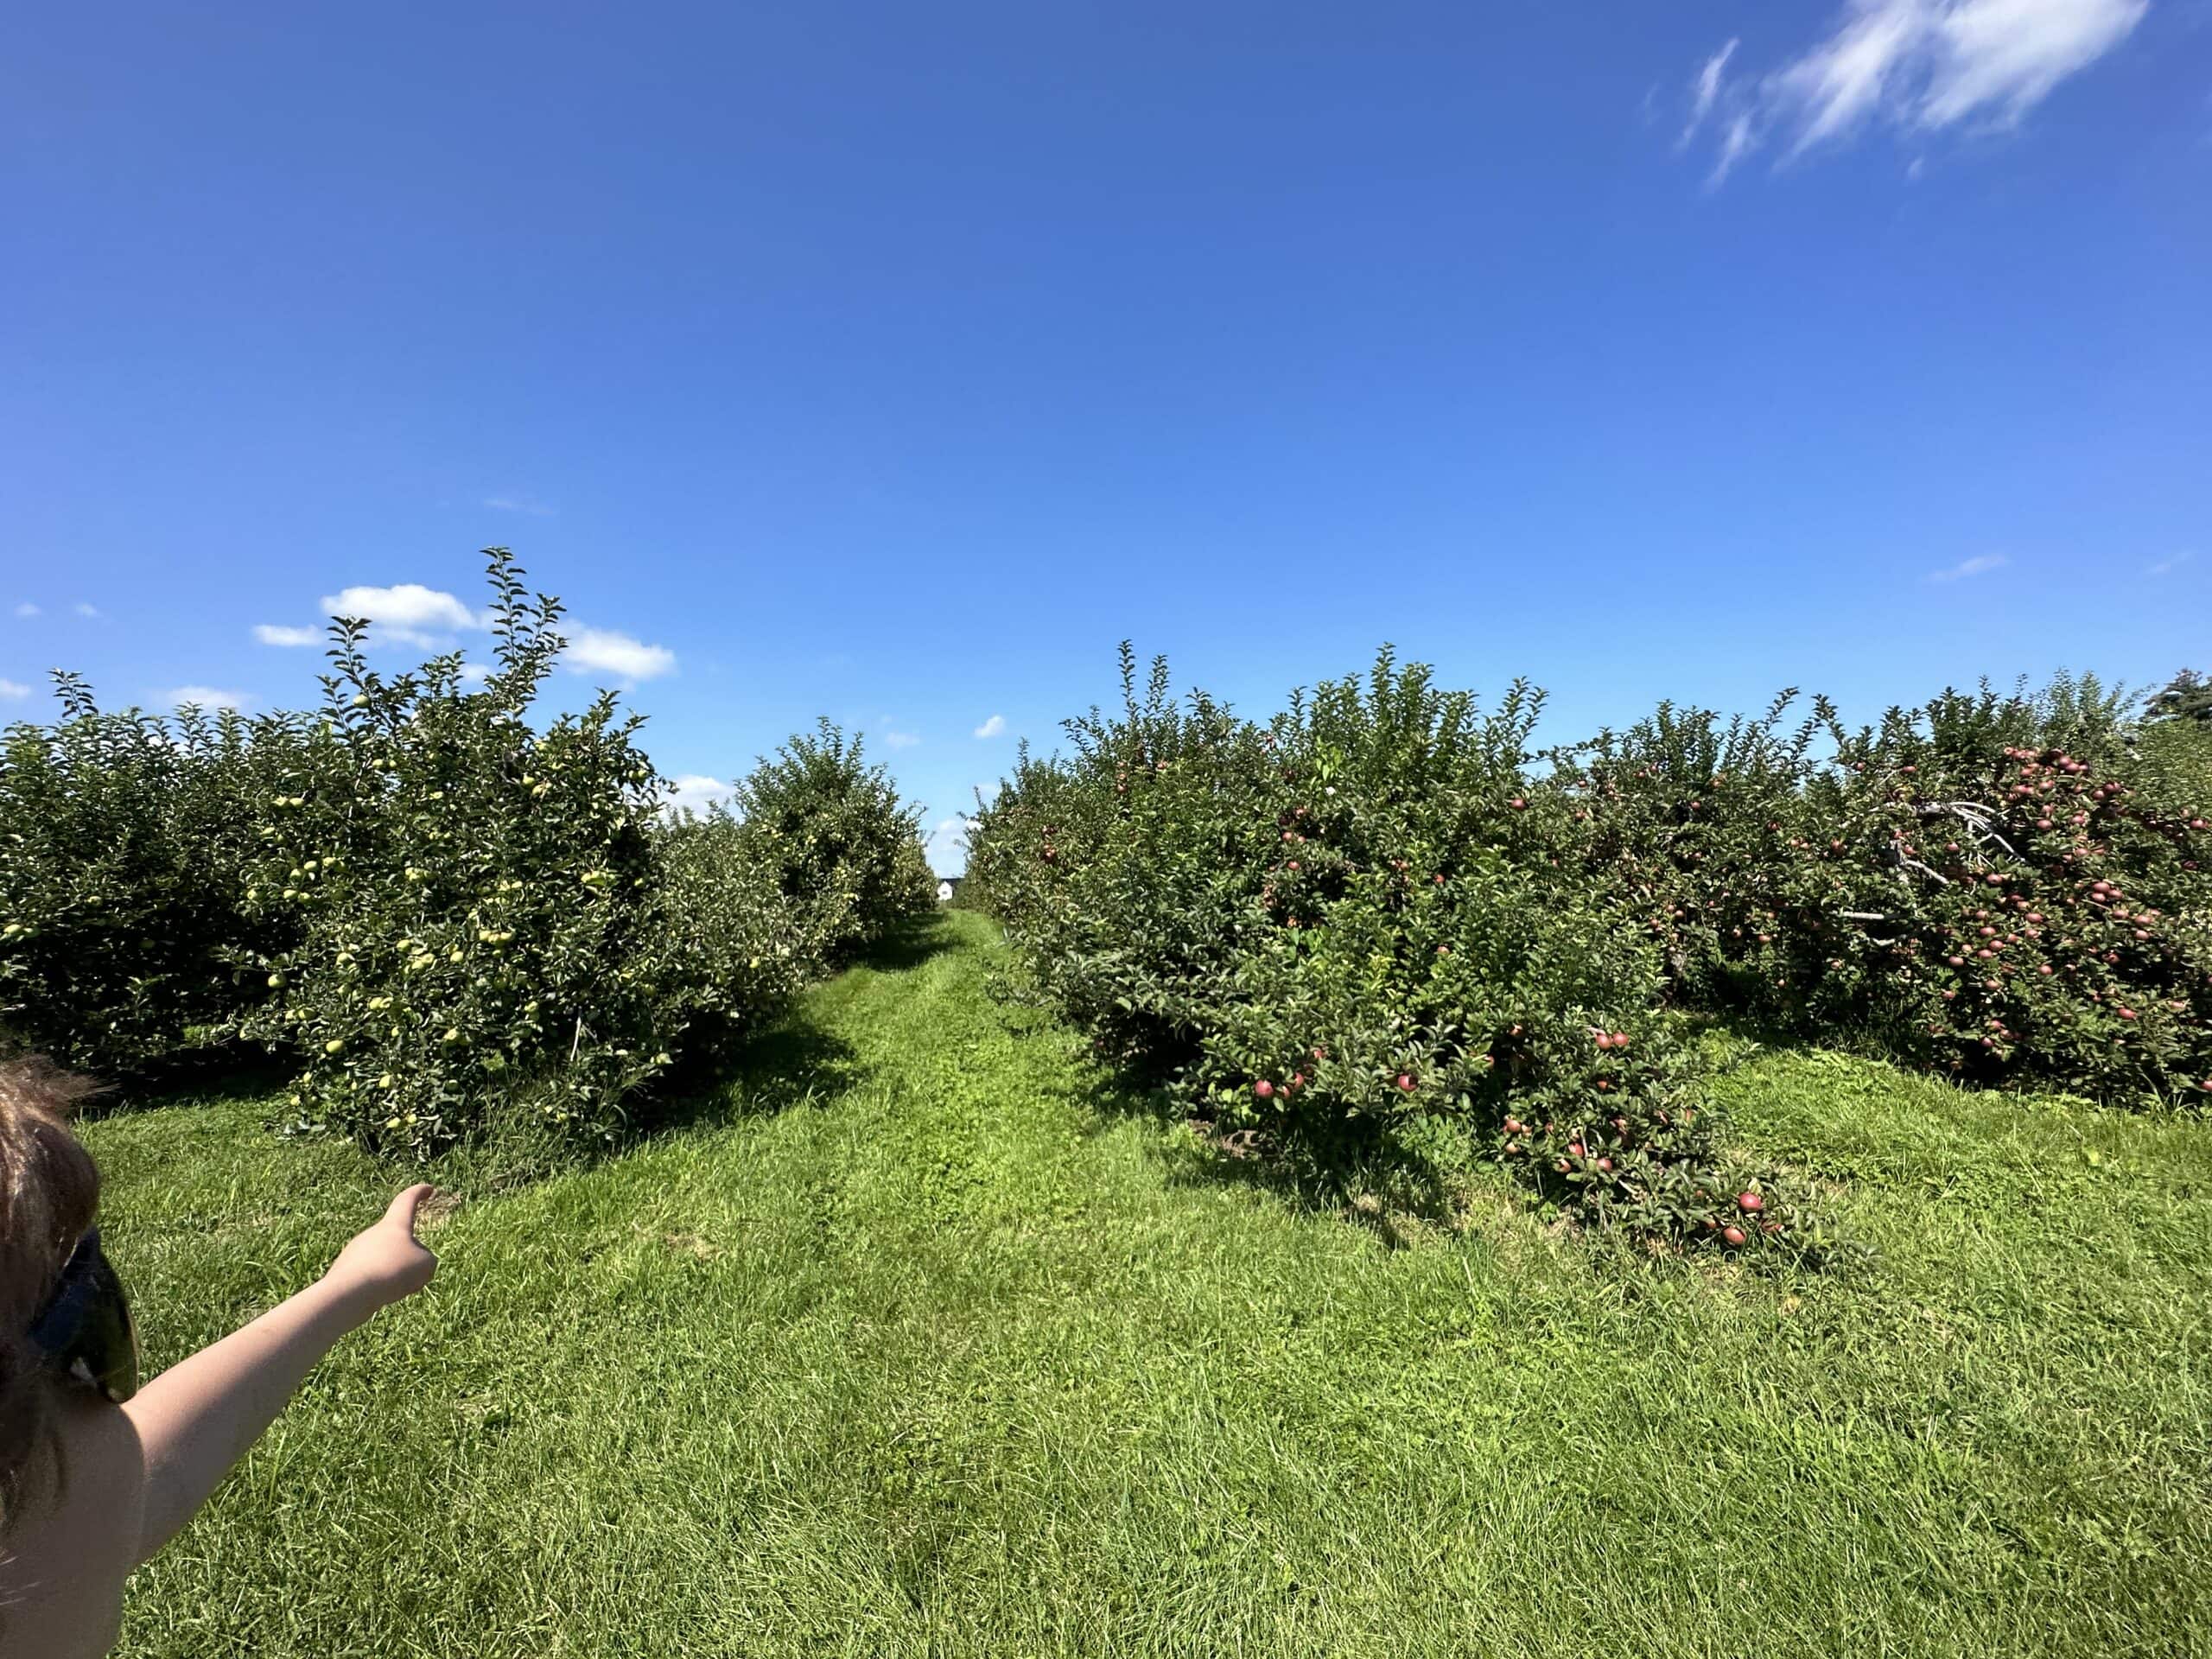 A kid points to towards an orchard of apple trees